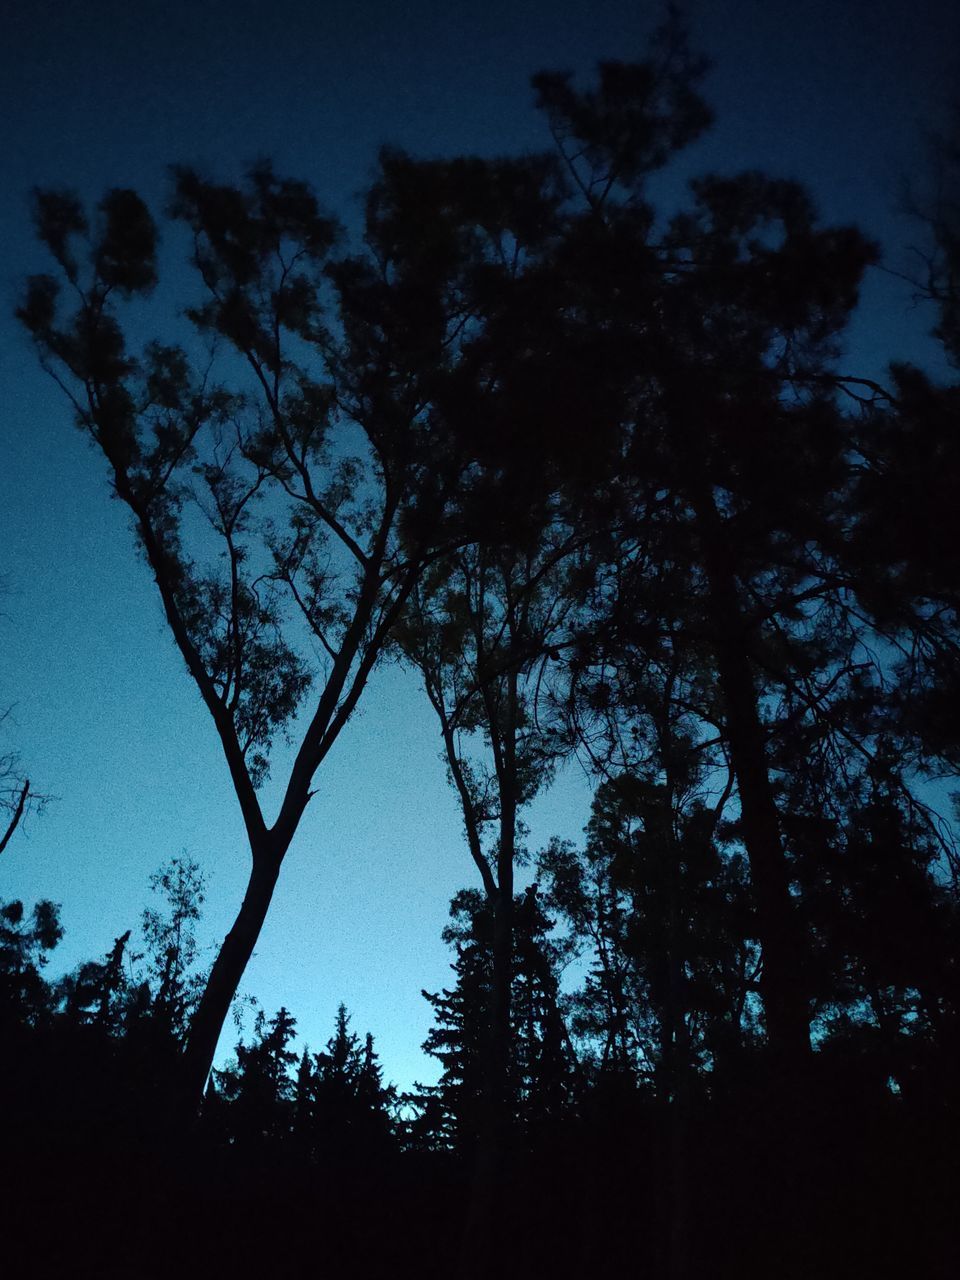 LOW ANGLE VIEW OF SILHOUETTE TREES AT NIGHT